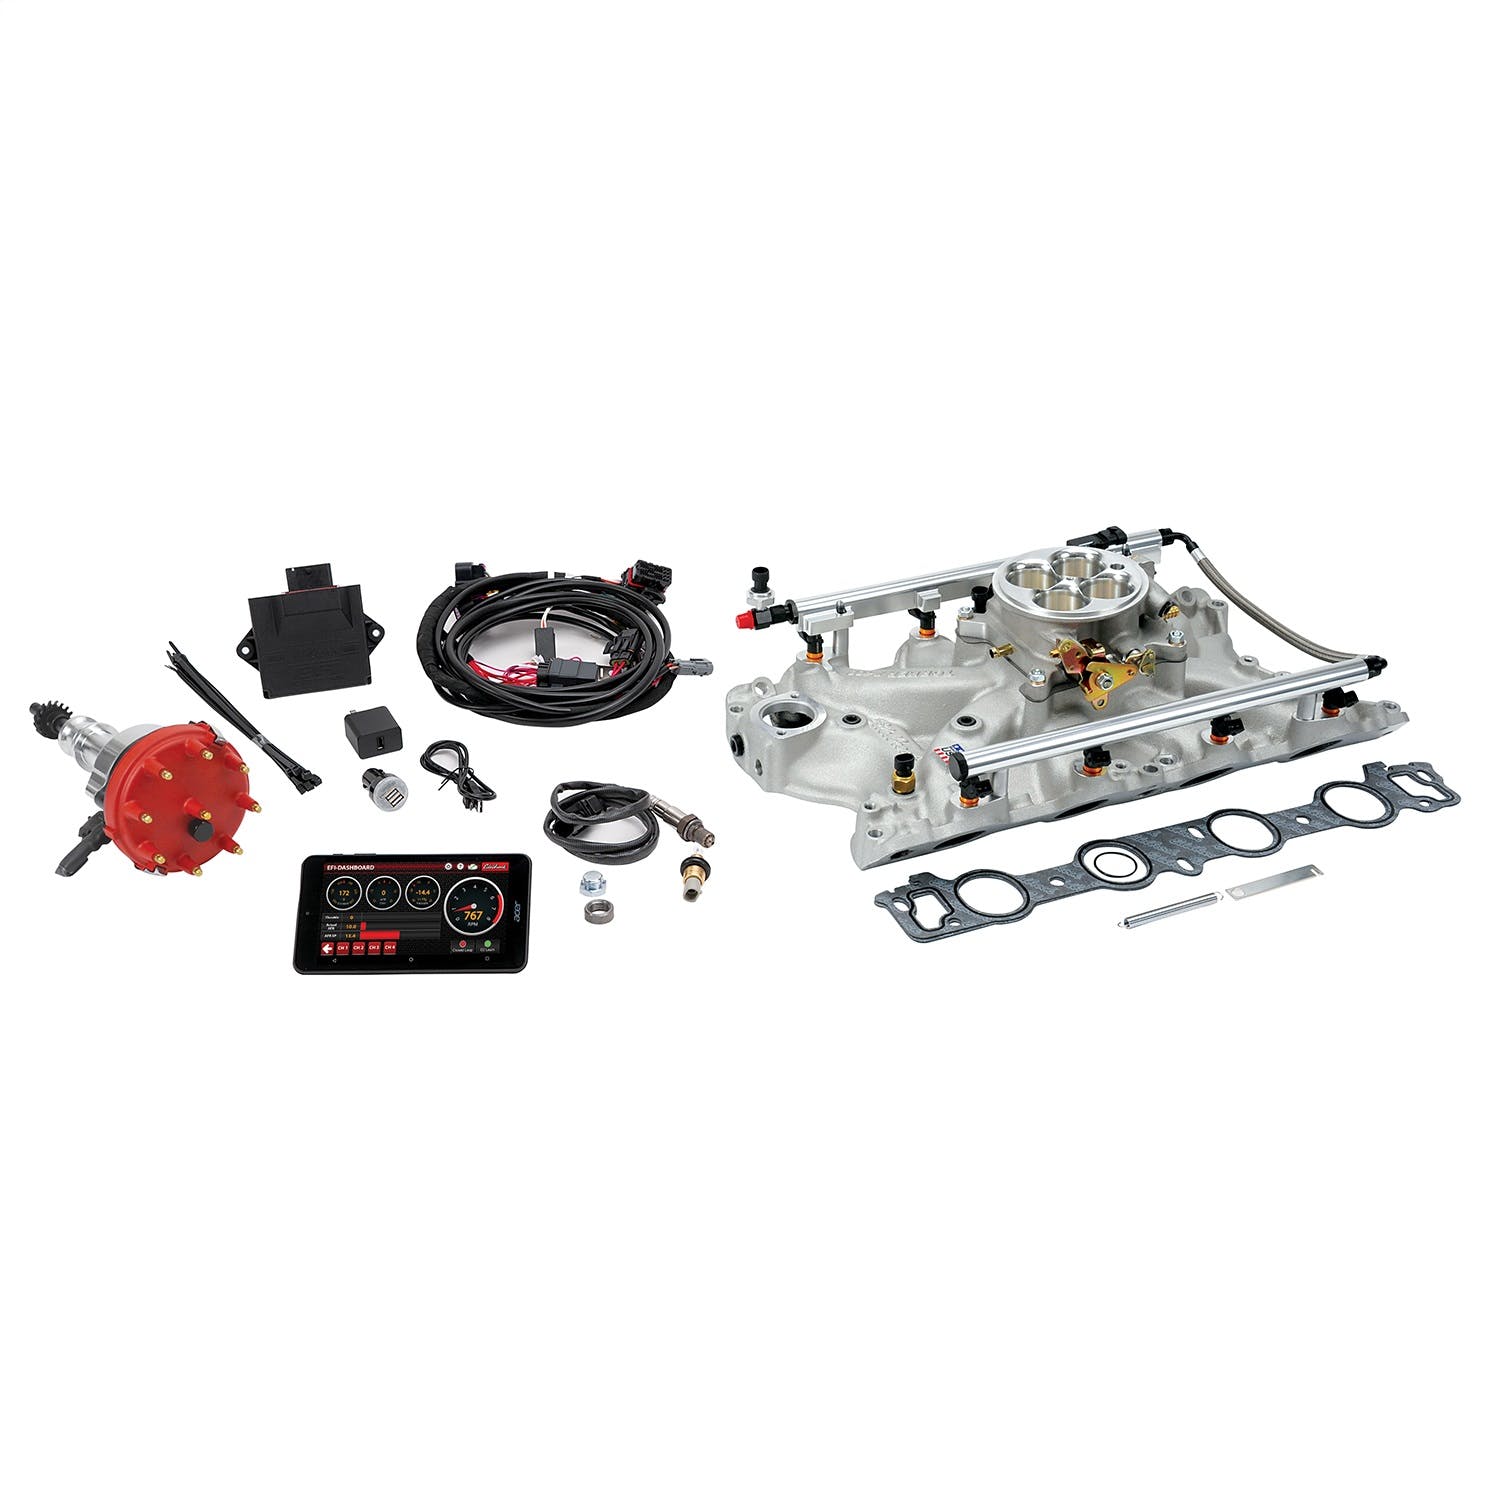 Edelbrock 35680 PF4 FUEL INJECTION KIT BBF 429/460 1968 TO 1987 675 MAX HP